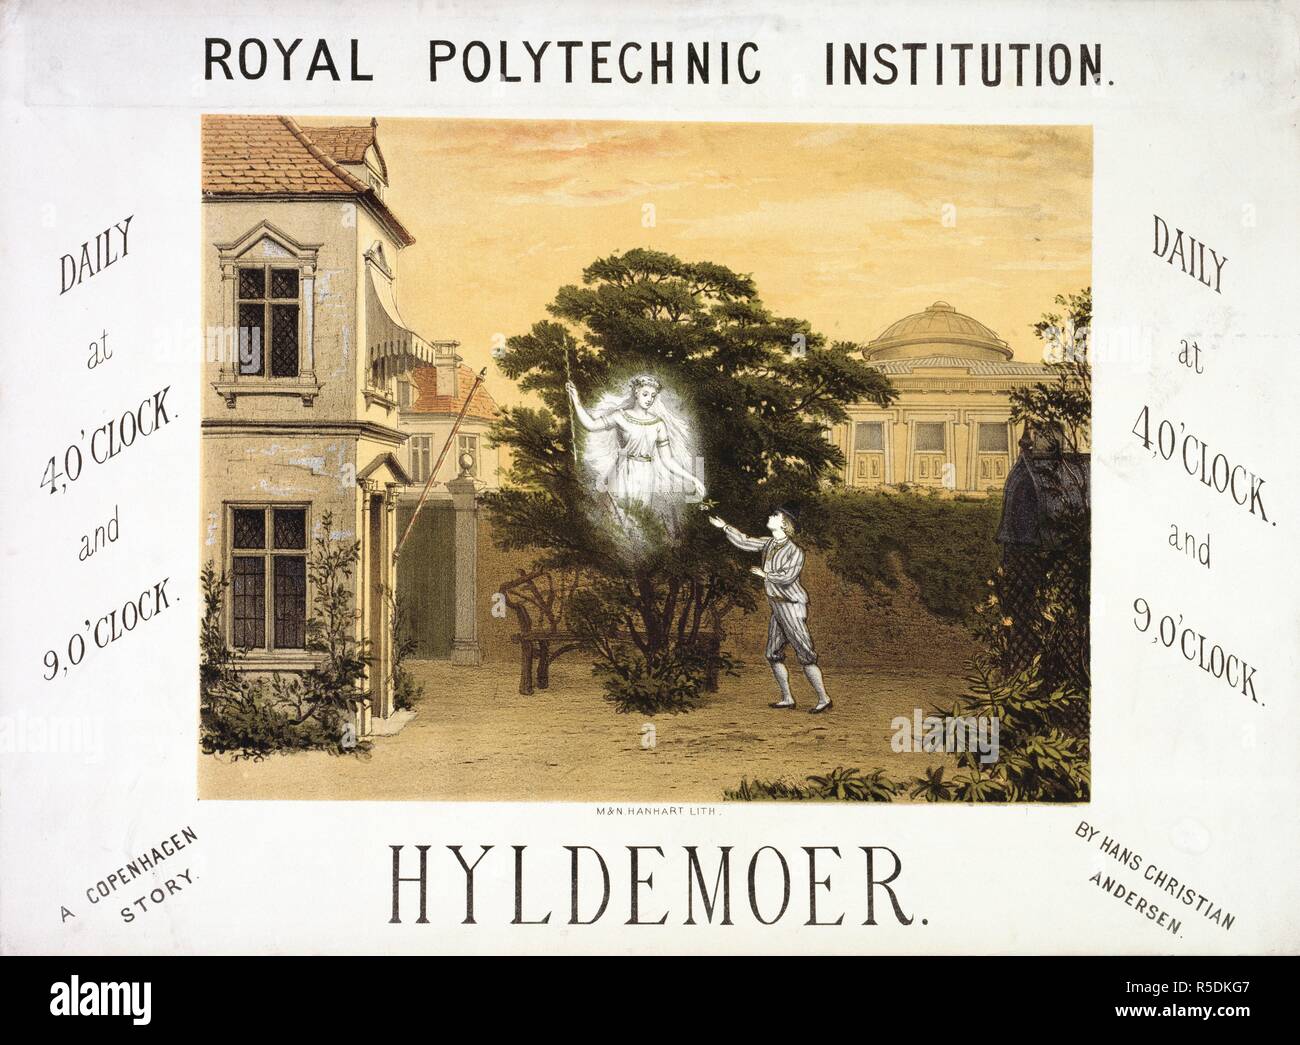 Royal Polytechnic Institution, (Westminster). Daily at 4, o'clock and 9,  o'clock. A Copenhagen story. Hyldemoer. By Hans Christian Andersen. A  collection of pamphlets, handbills, and miscellaneous printed matter  relating to Victorian entertainment